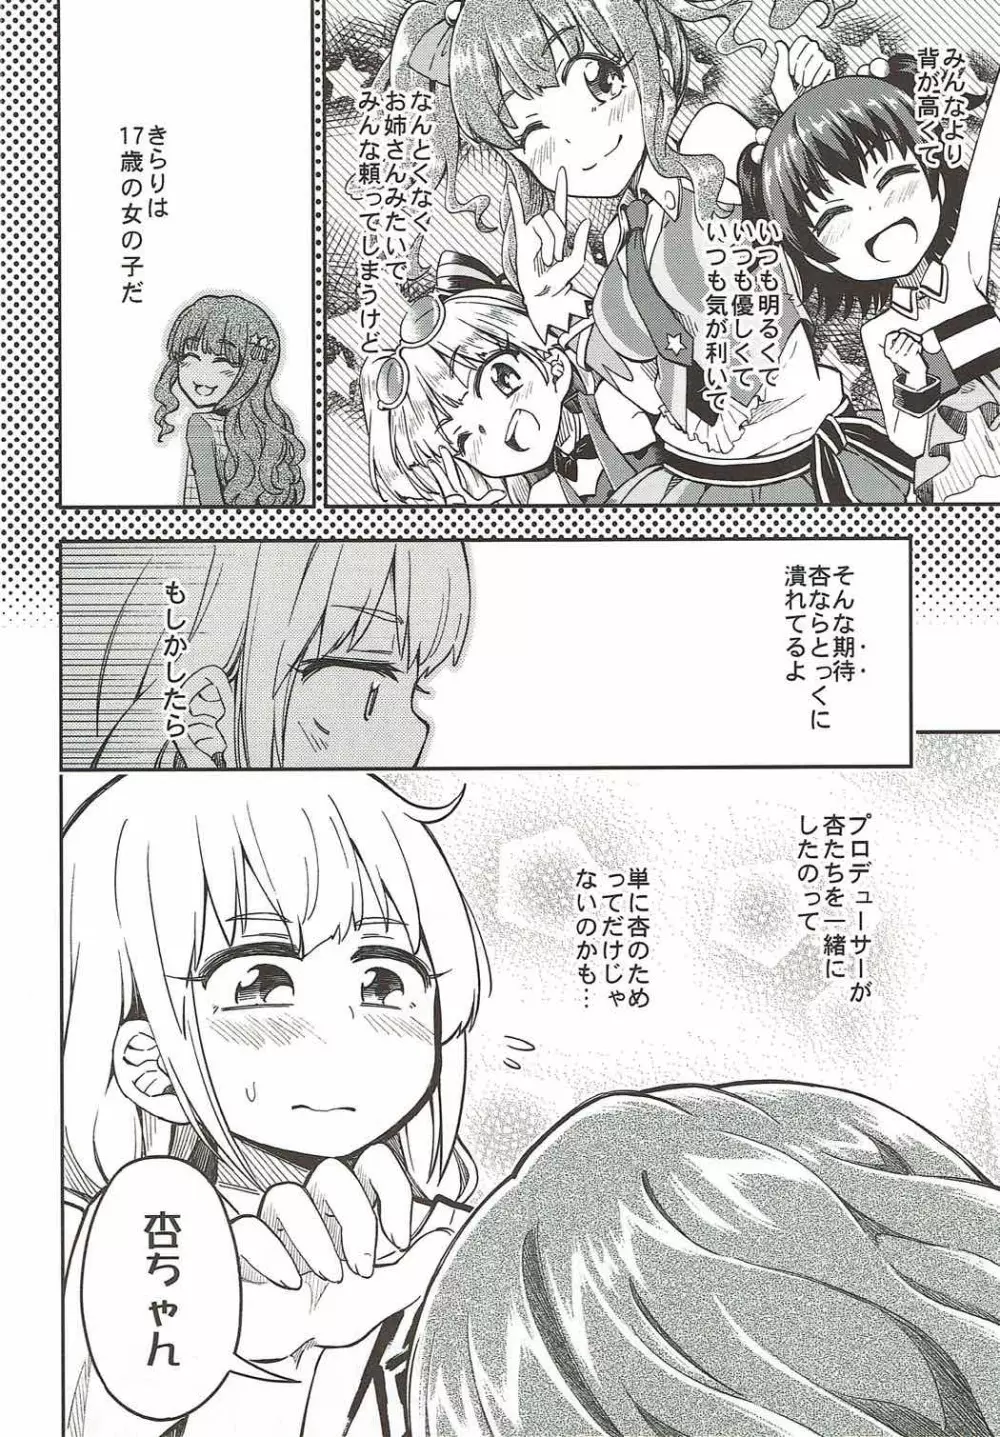 Lovely Girls' Lily vol.16 - page9